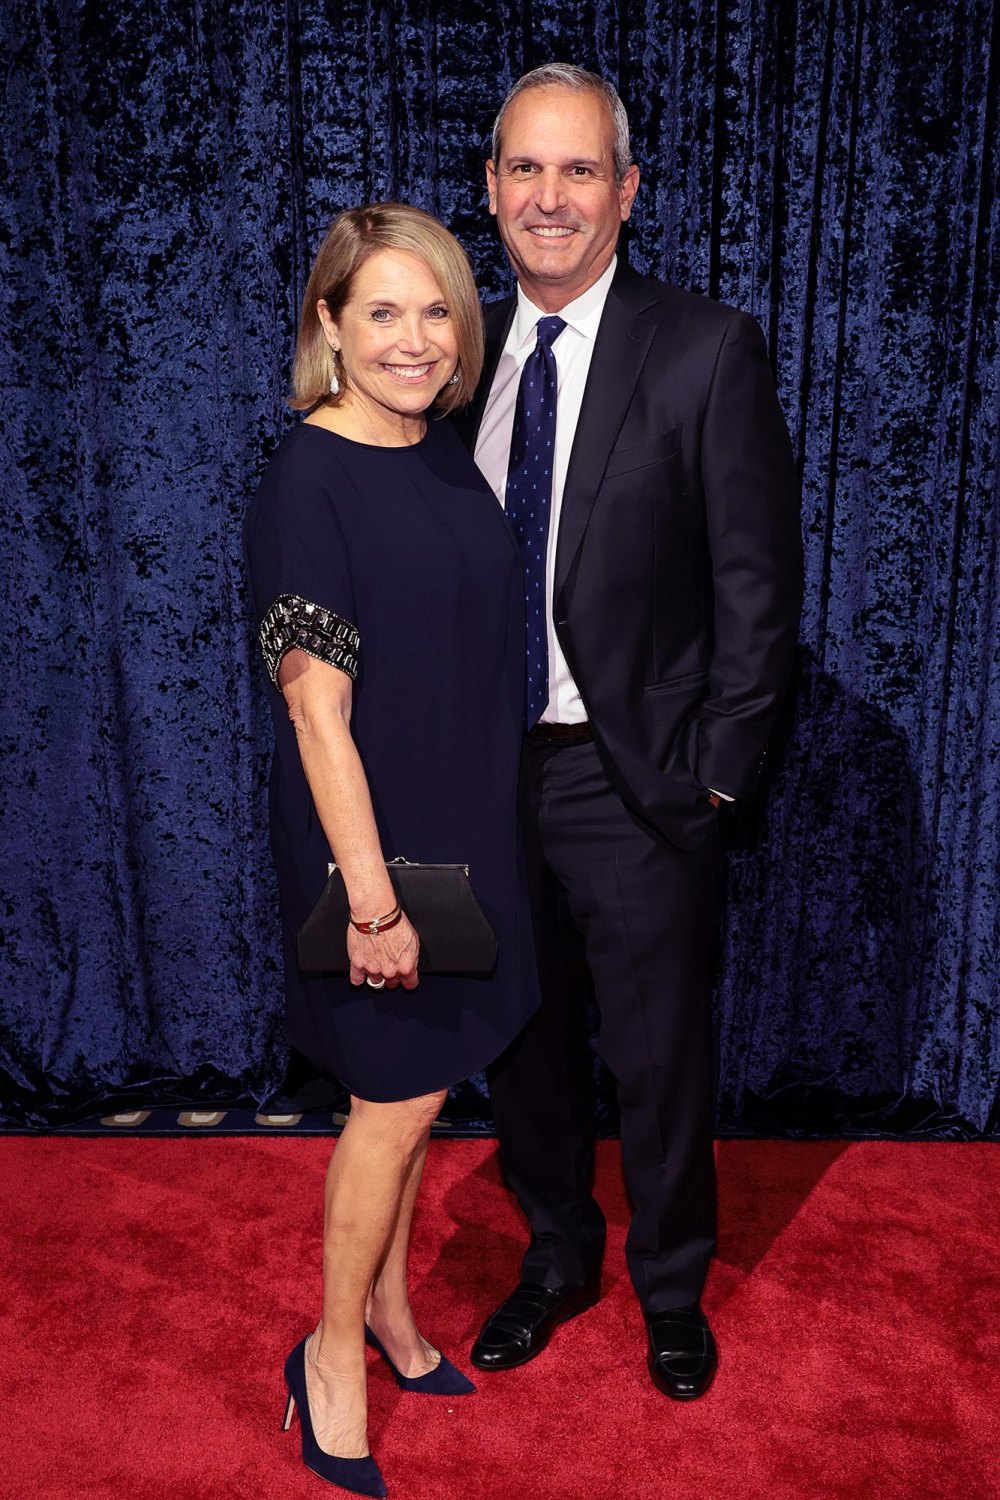 Katie Couric Shares the Secret Behind Her Nearly 10 Year Marriage With Husband John Molner 952